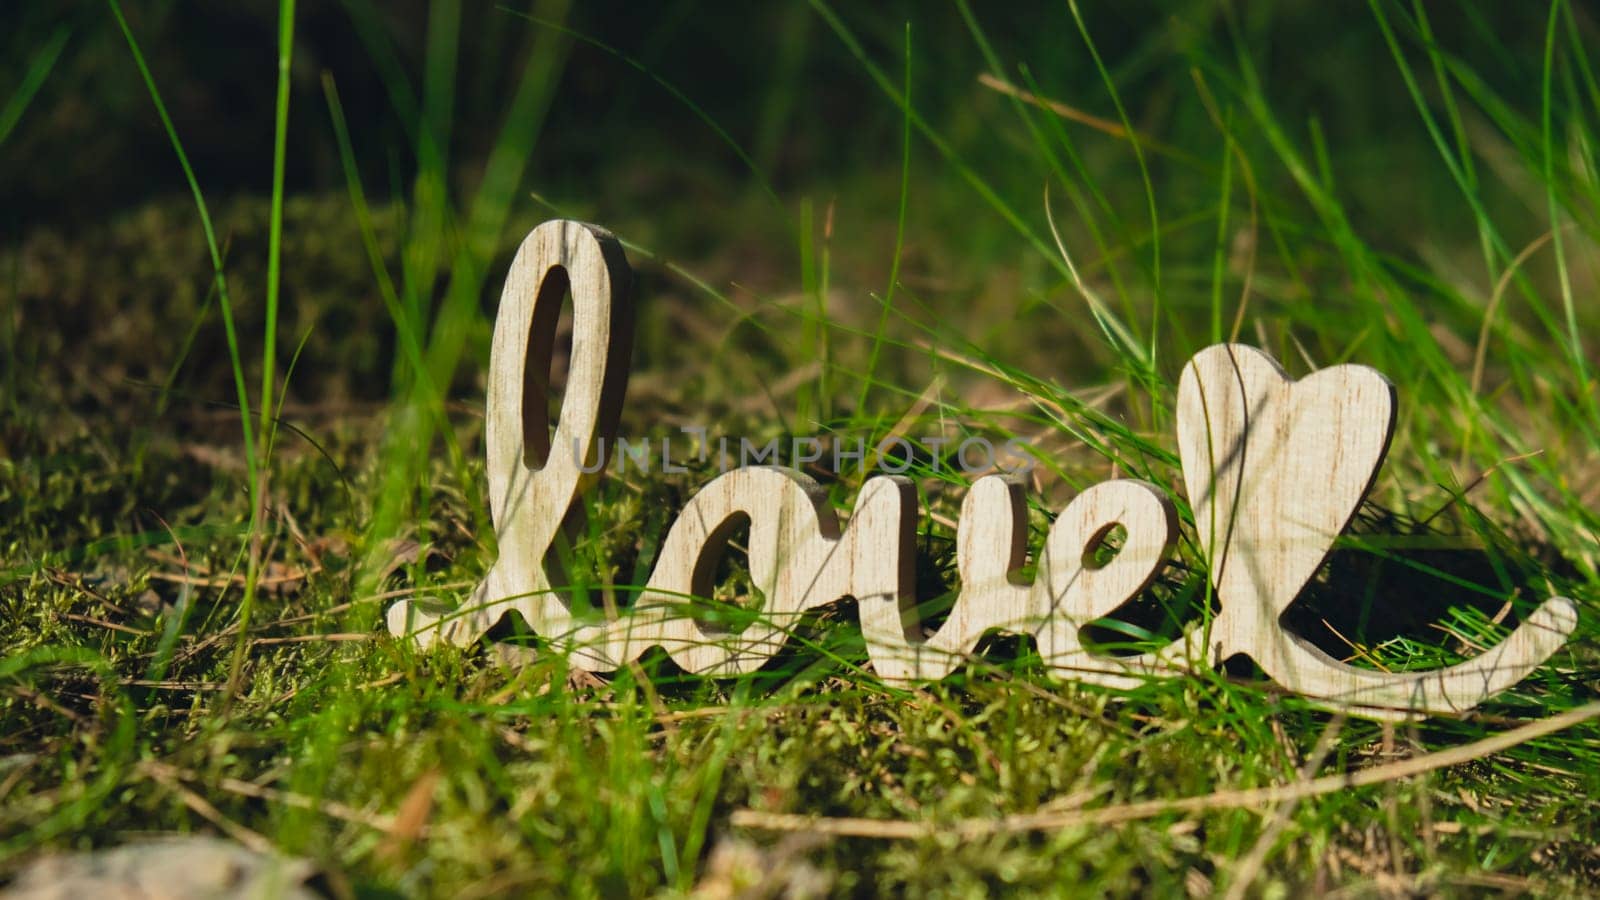 Wooden word love on greenery environment forest green grass background. Minimal of greeting for Valentine's Day holiday card. Concept of unity with nature, sustainable lifestyle